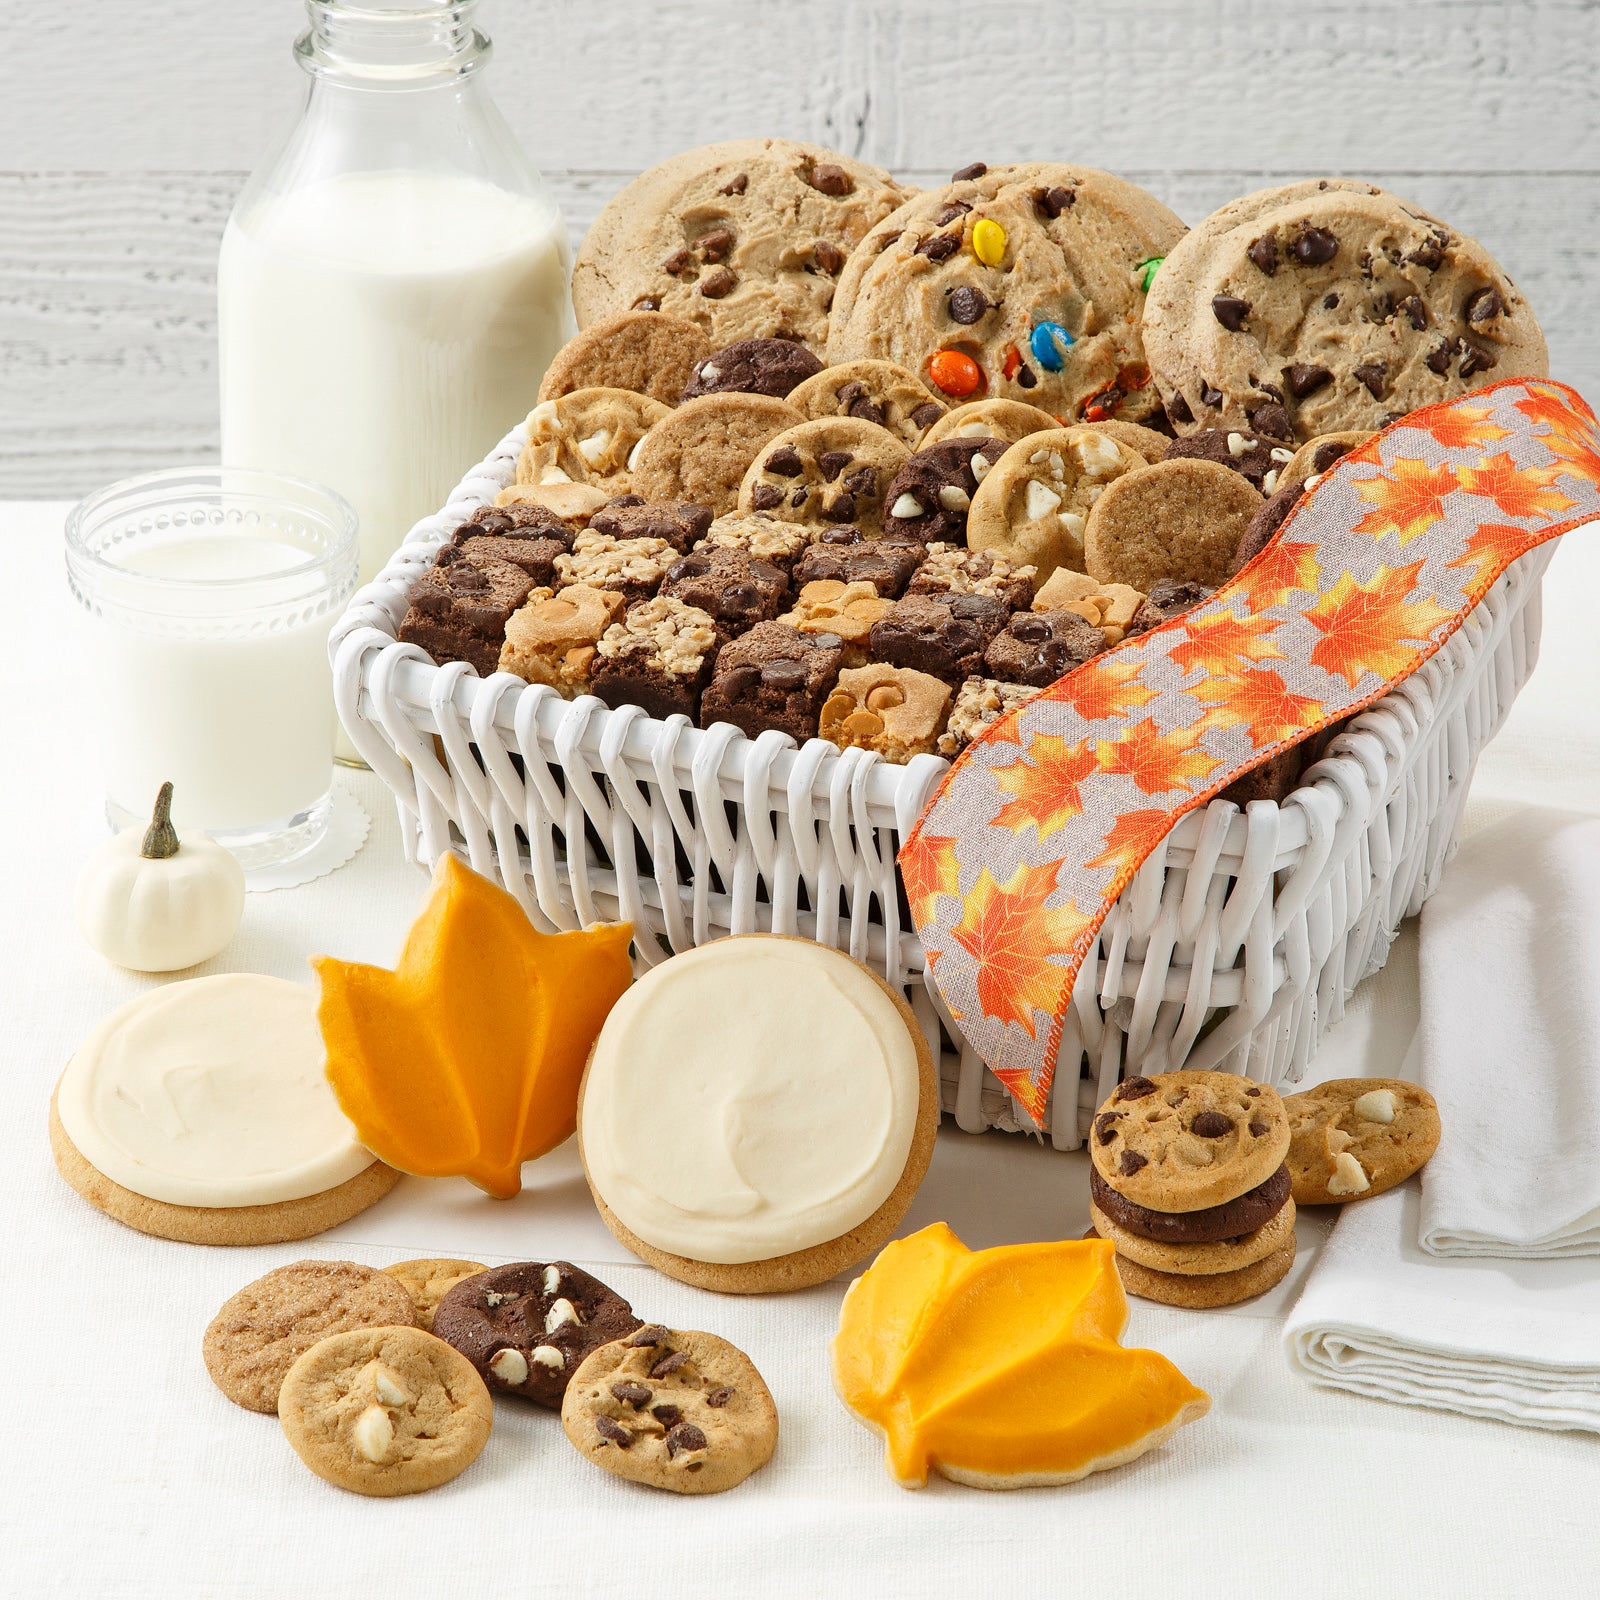 Small white basket filled with mega cookies, Nibblers®, and brownie bites. In front of basket is an assortment of Nibblers®, two round frosted cookies and two leaf cookies.